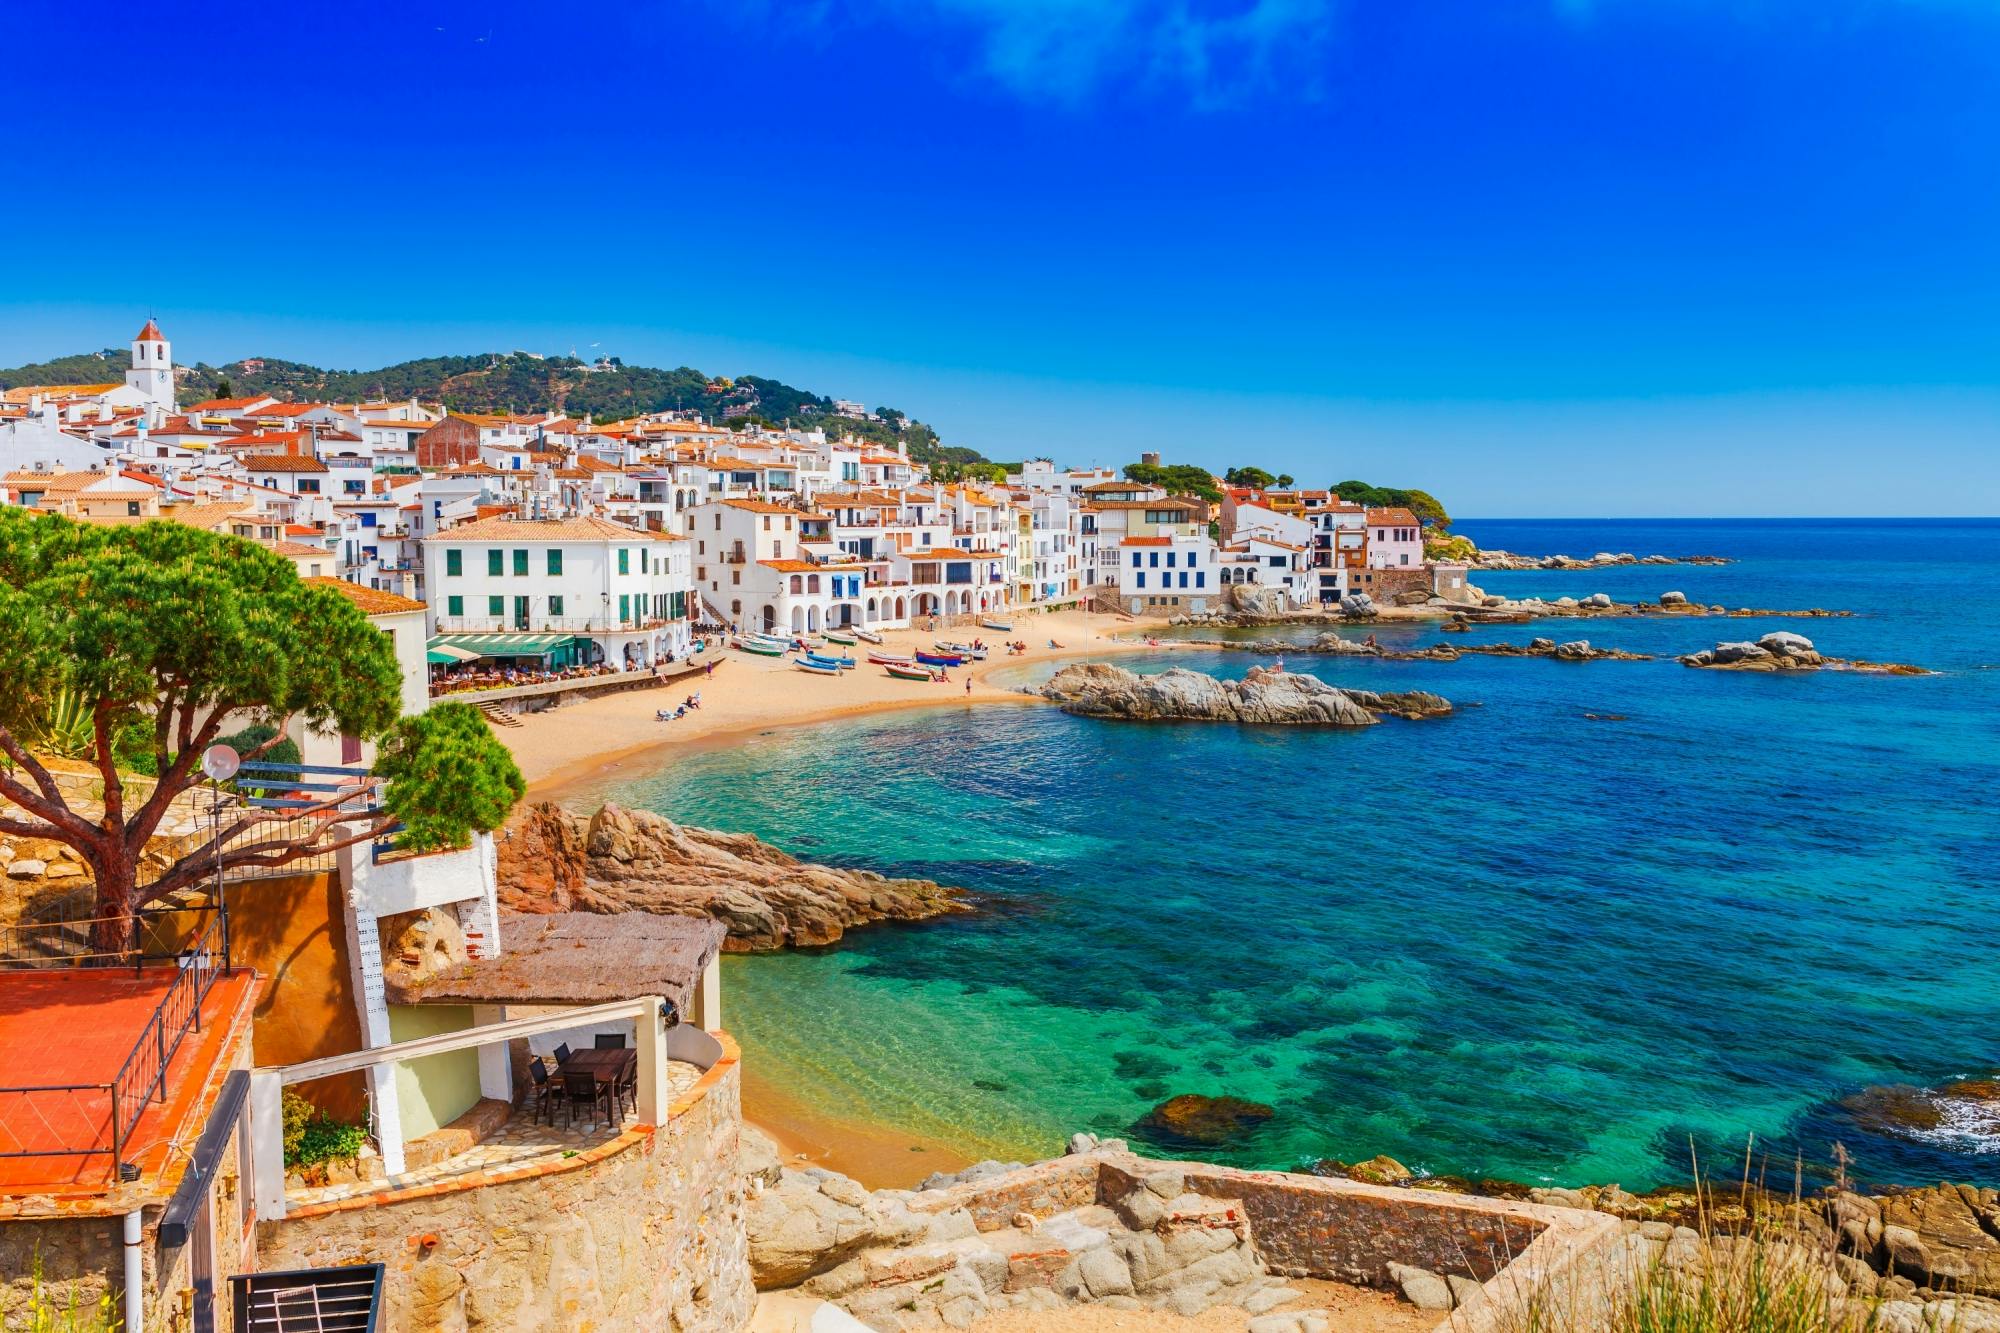 Costa Brava 1 day tour from Barcelona Musement